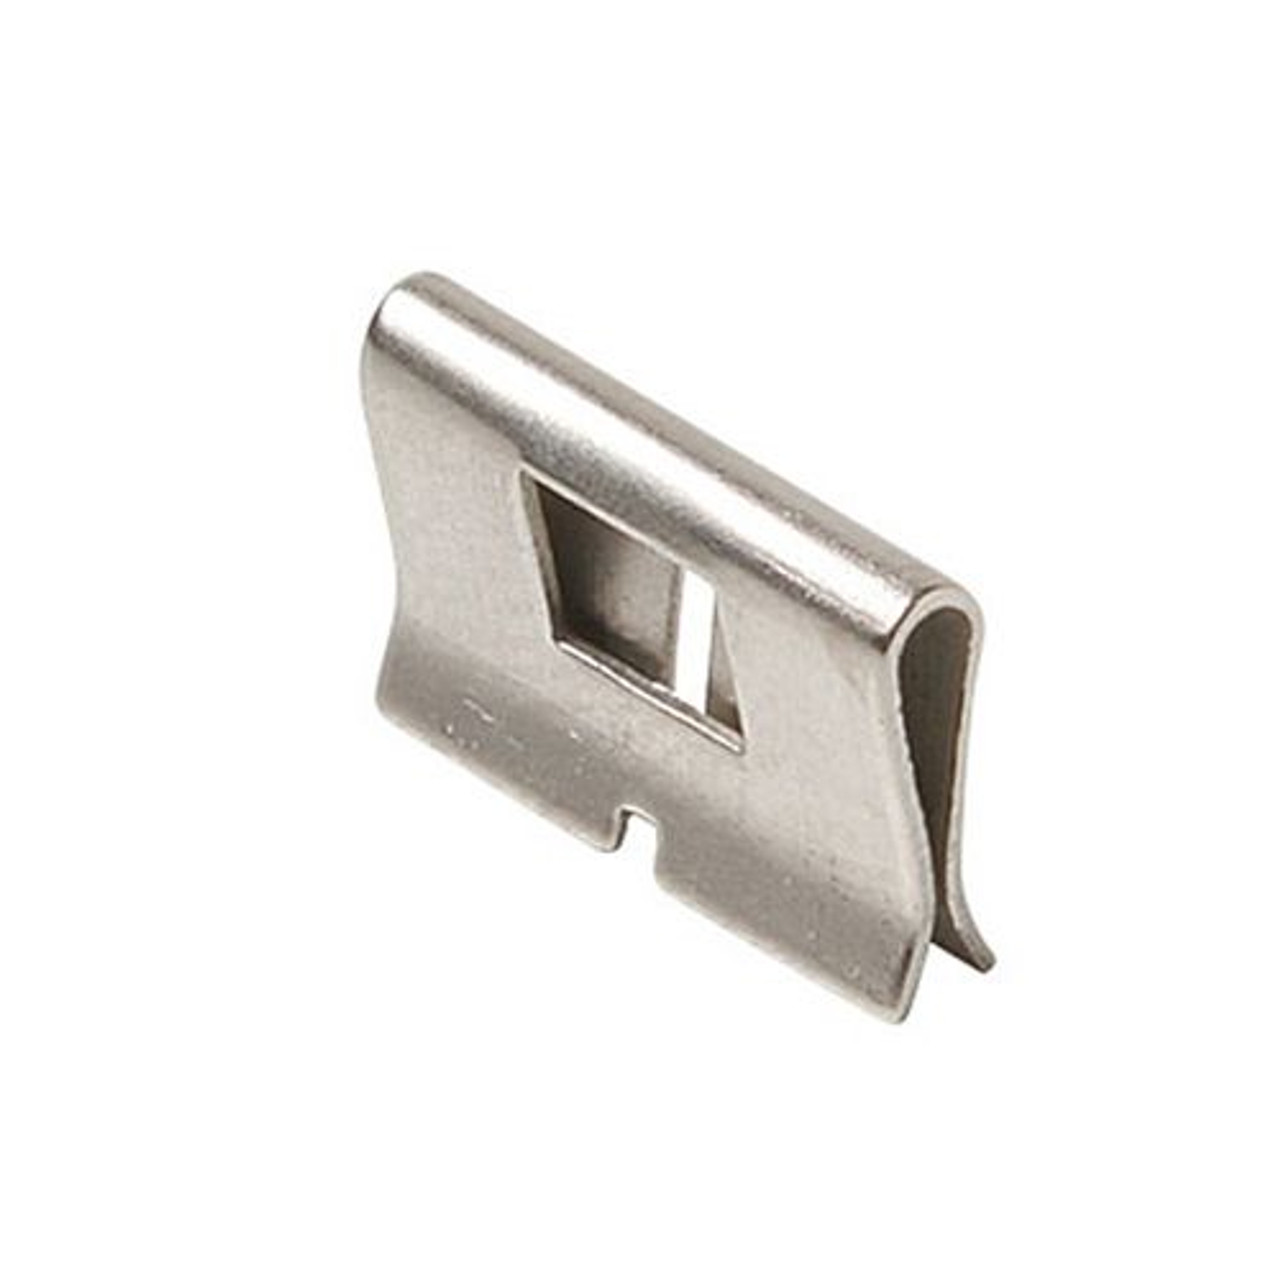 Eagle Bridging Clips For 66 Wiring Block 50 Pack Voice / Data Modular Telephone 66-IDC Split Block Wiring Clip 1/2" W x 1/3" H Reusable for Wire Changes Nickel Plated Brass Construction, Commercial Grade